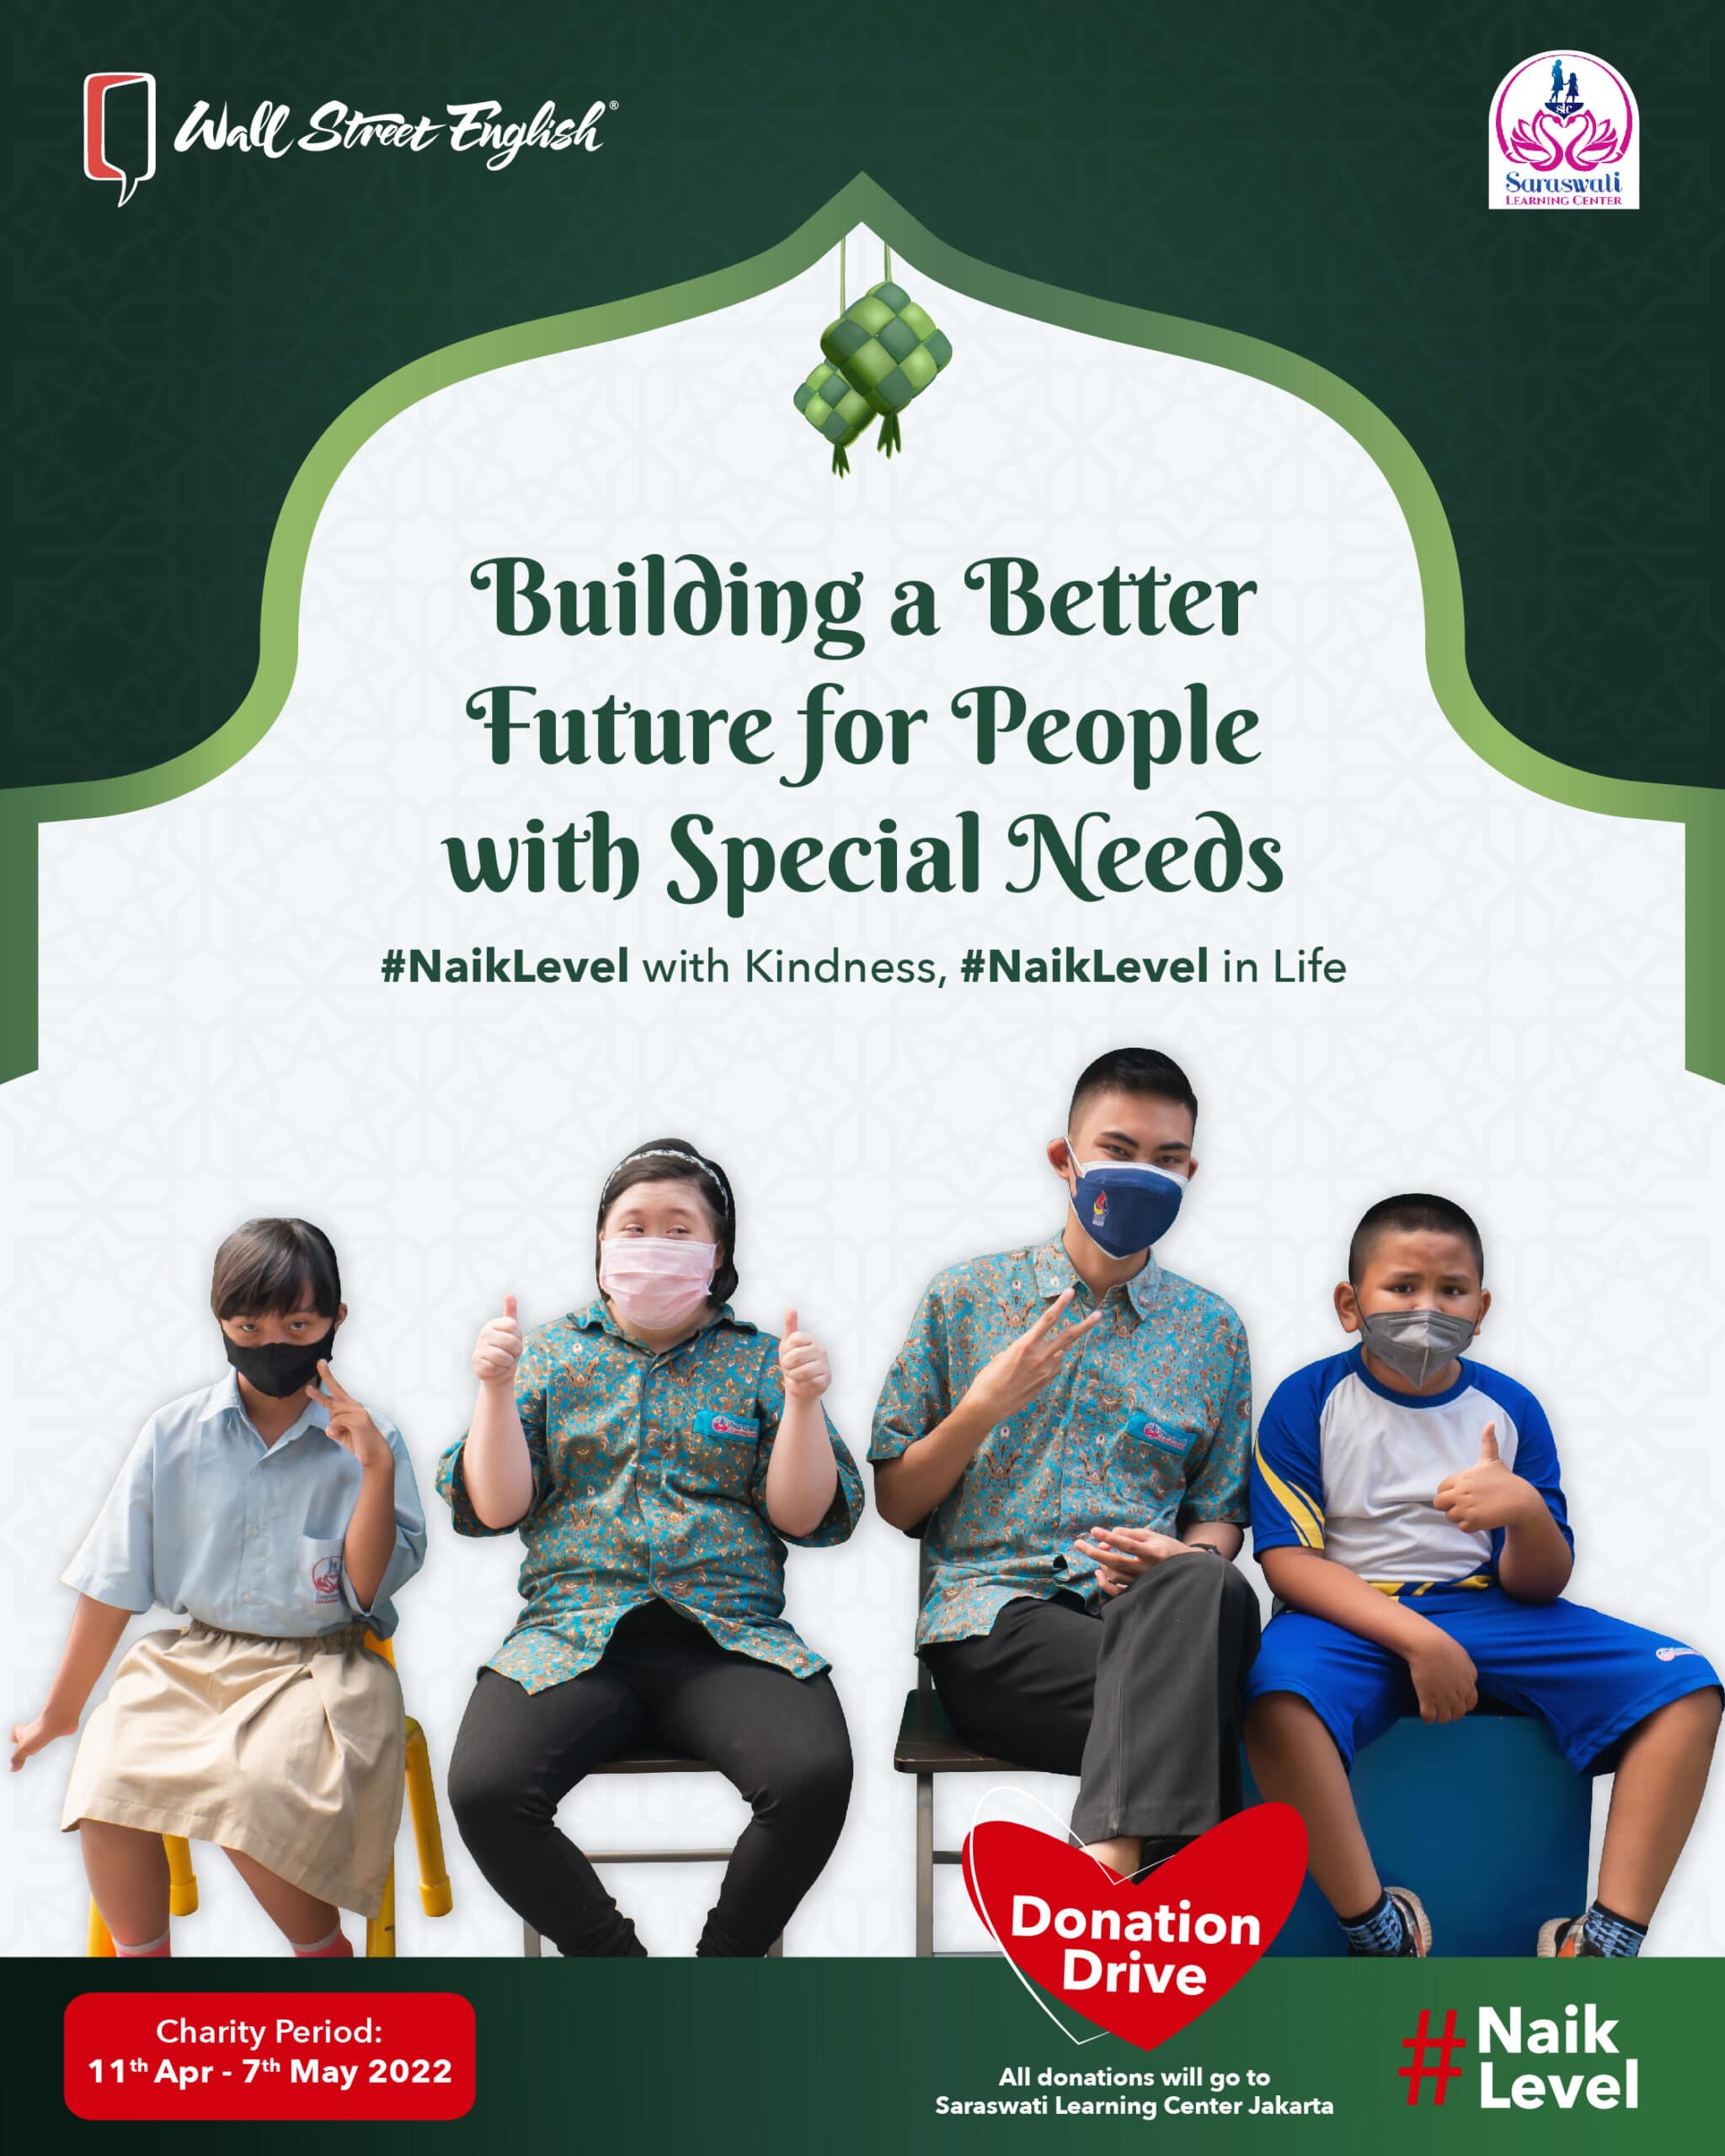 Let’s Build a Better Future for People With Special Needs!